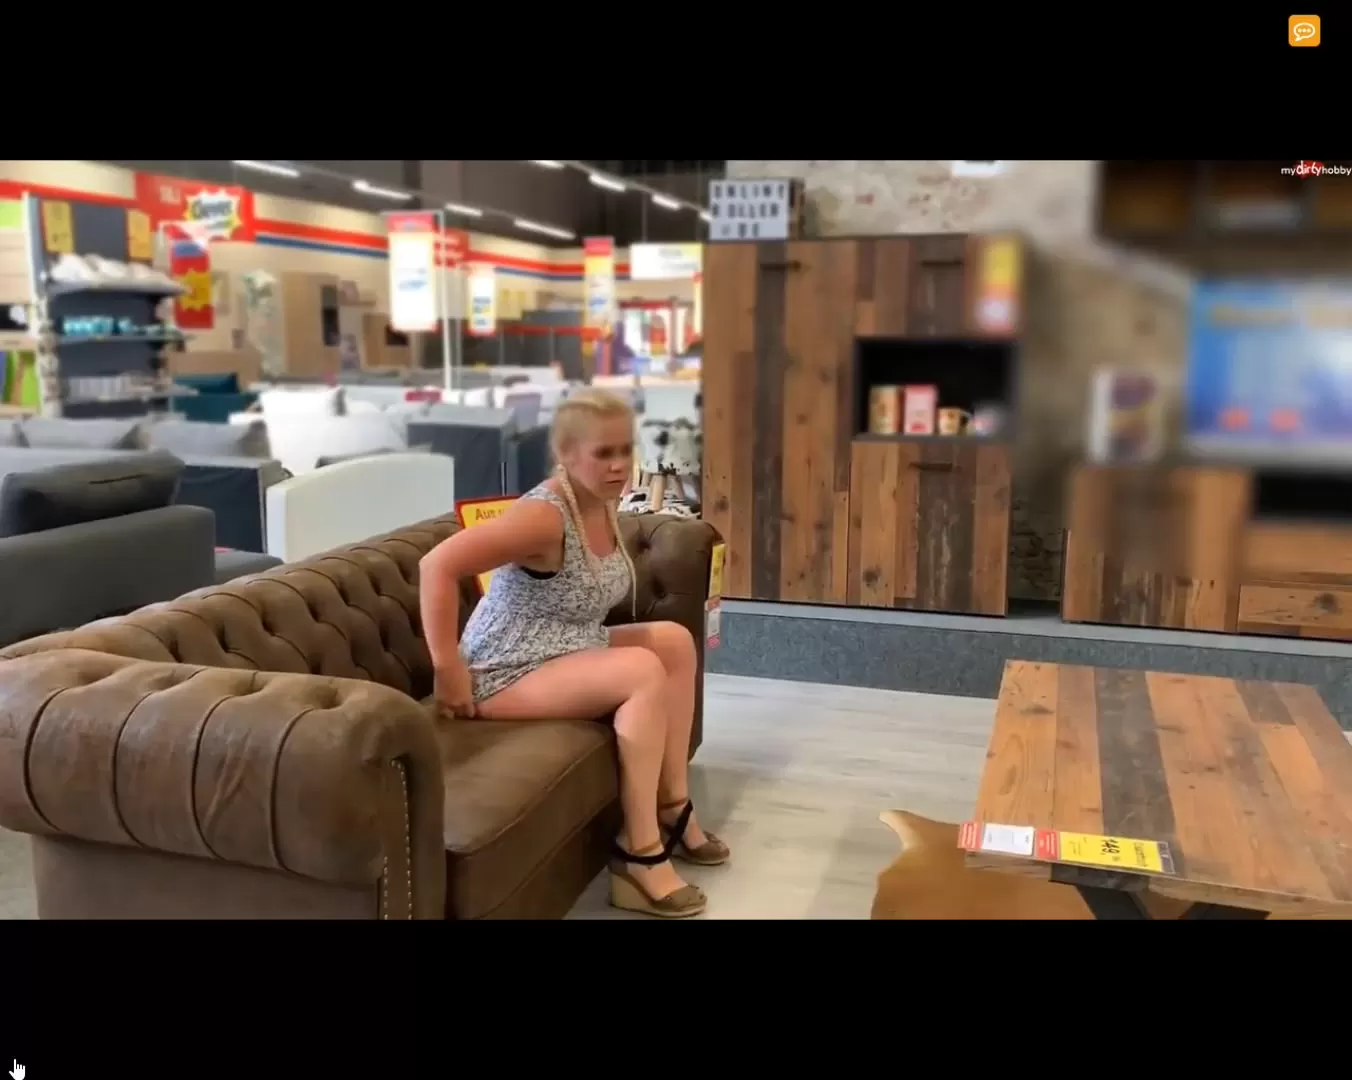 Woman pissing on a couch in furniture market photo